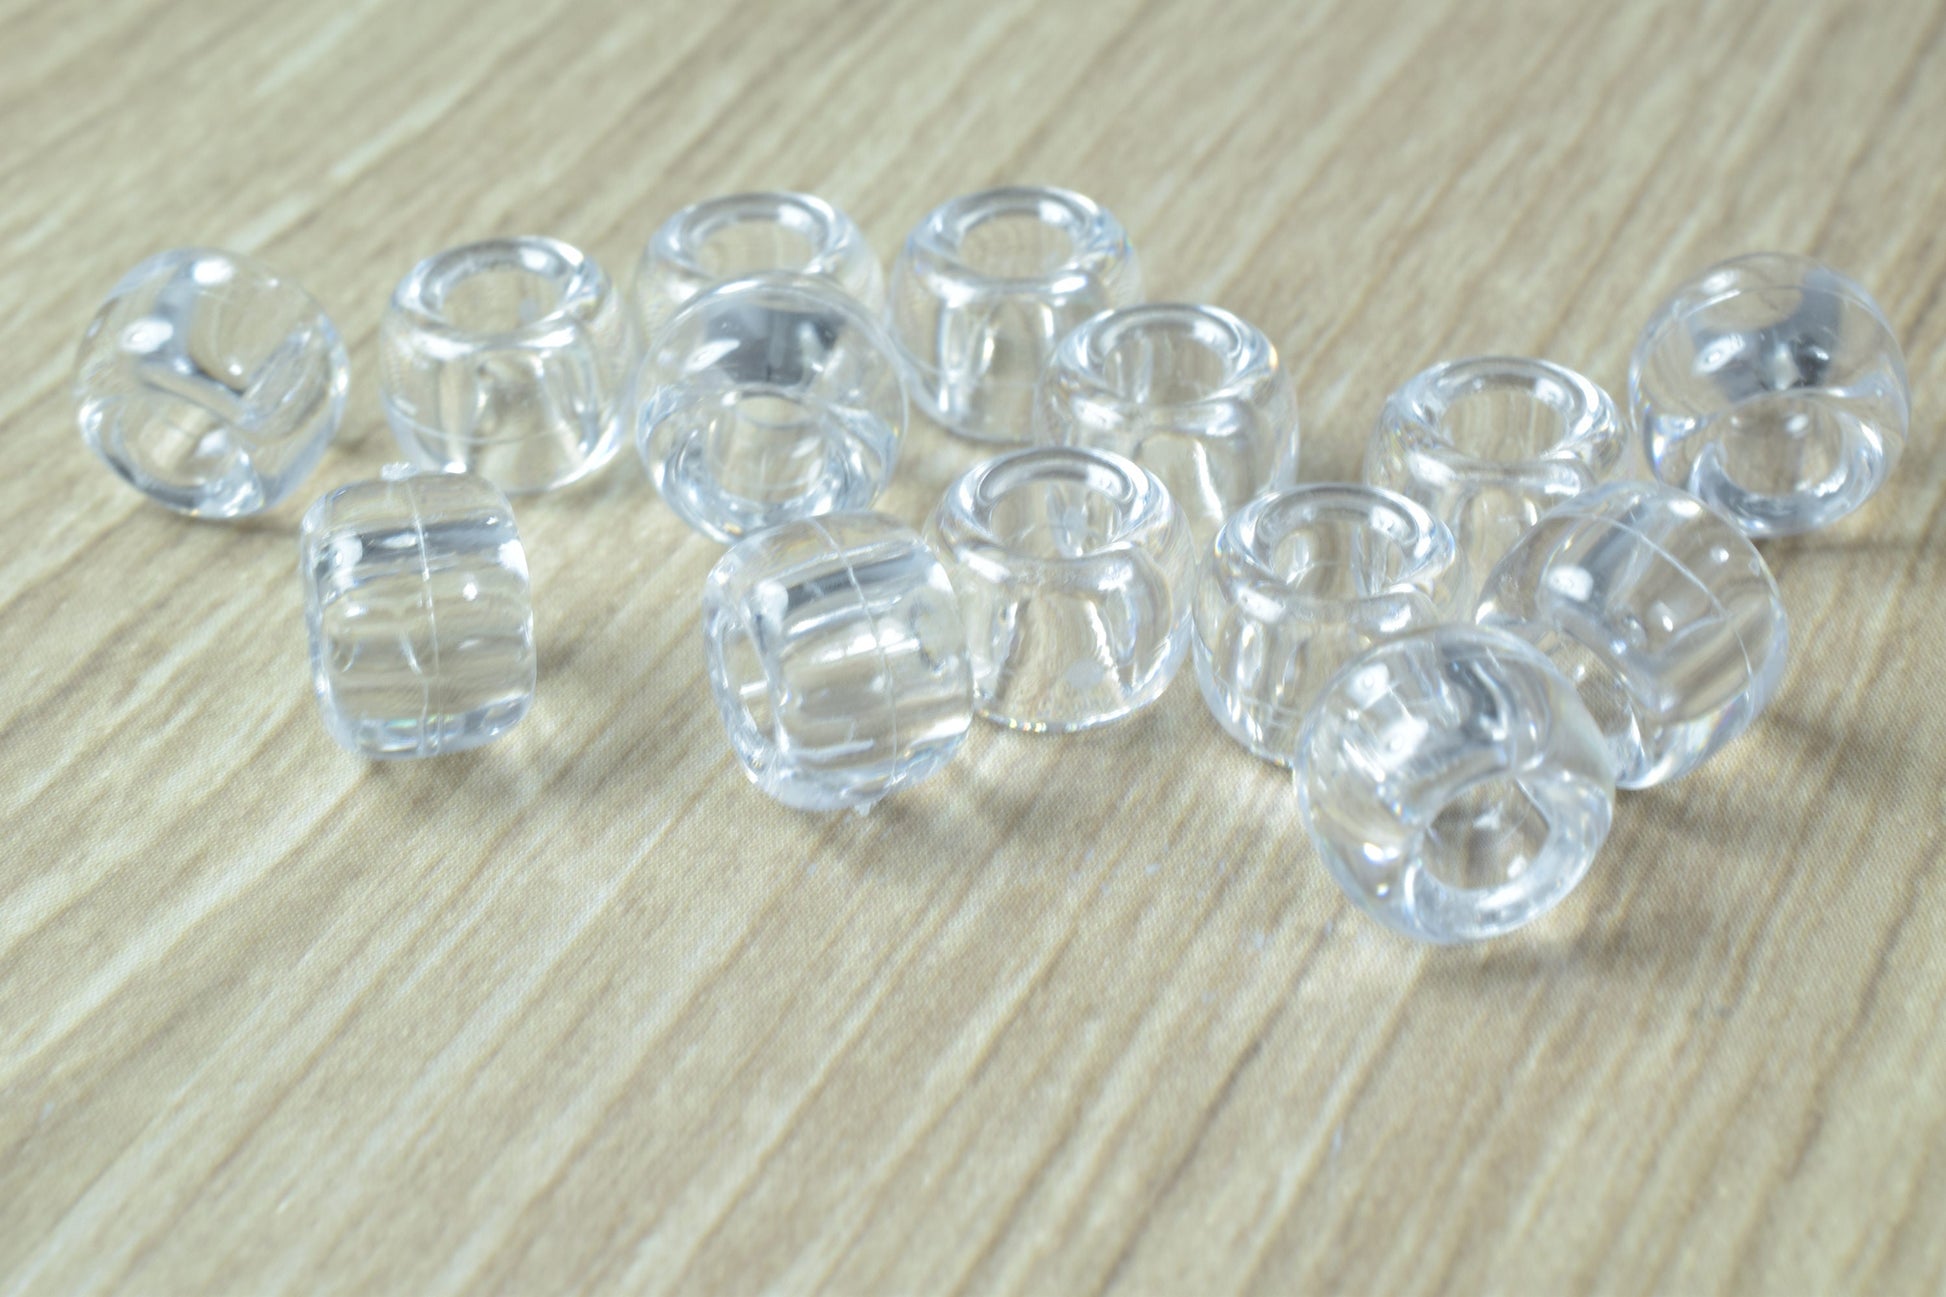 9mm Plastic Pony Beads with smooth surface, Hole size may slightly vary, Wholesale Pony Beads, Vintage plastic beads,